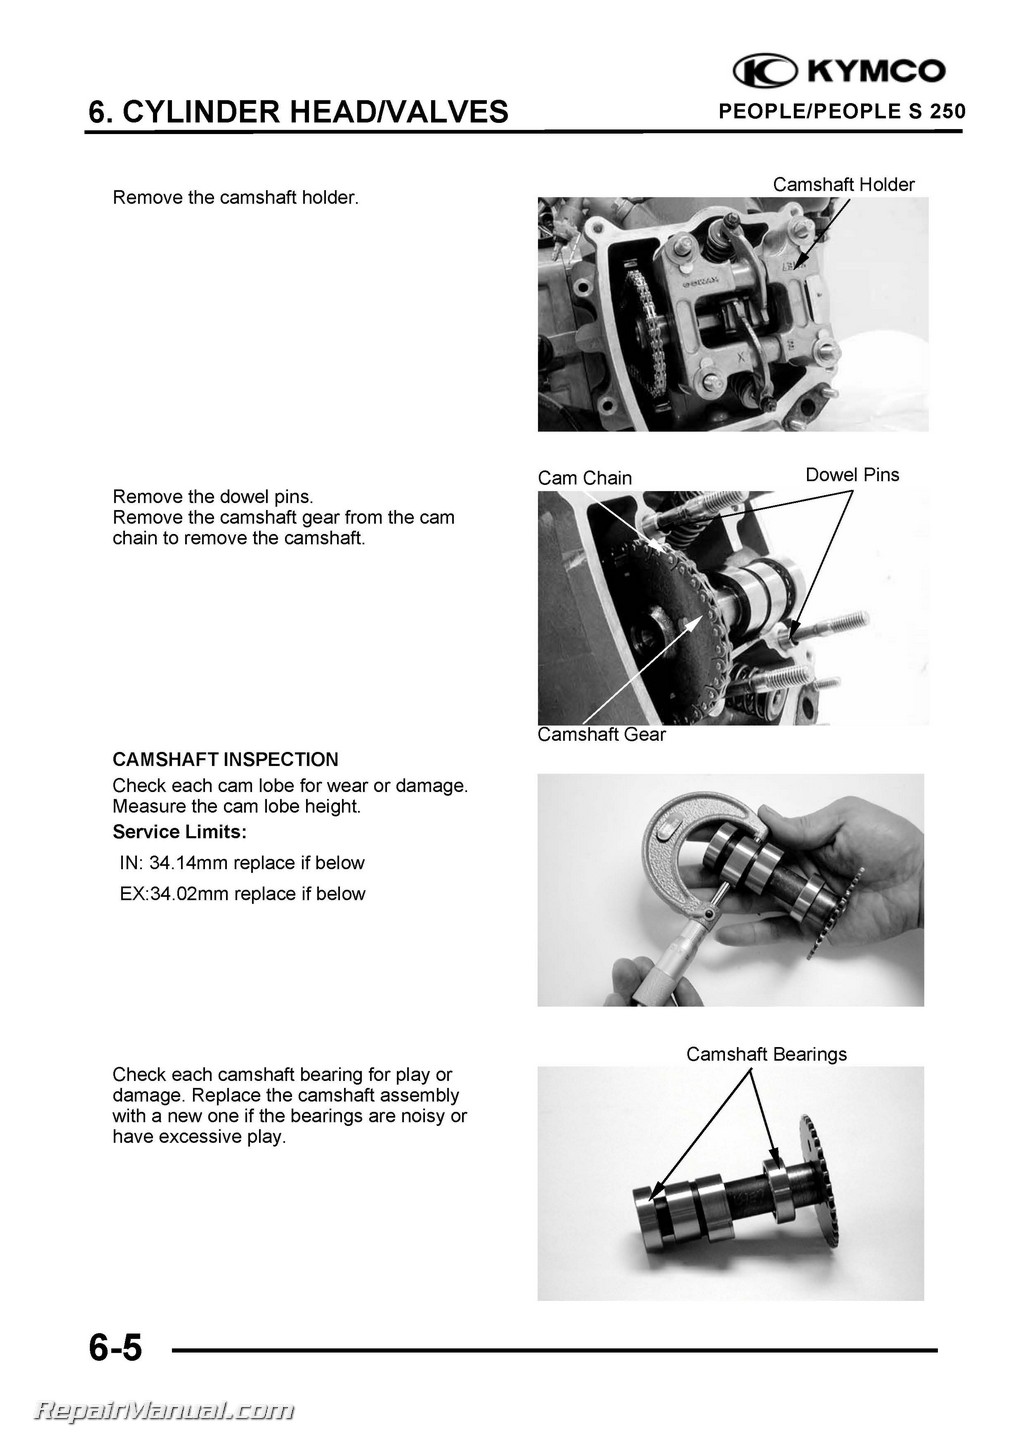 KYMCO People 250 and S 250 Scooter Service Manual Printed ... free honda motorcycle wiring diagrams 